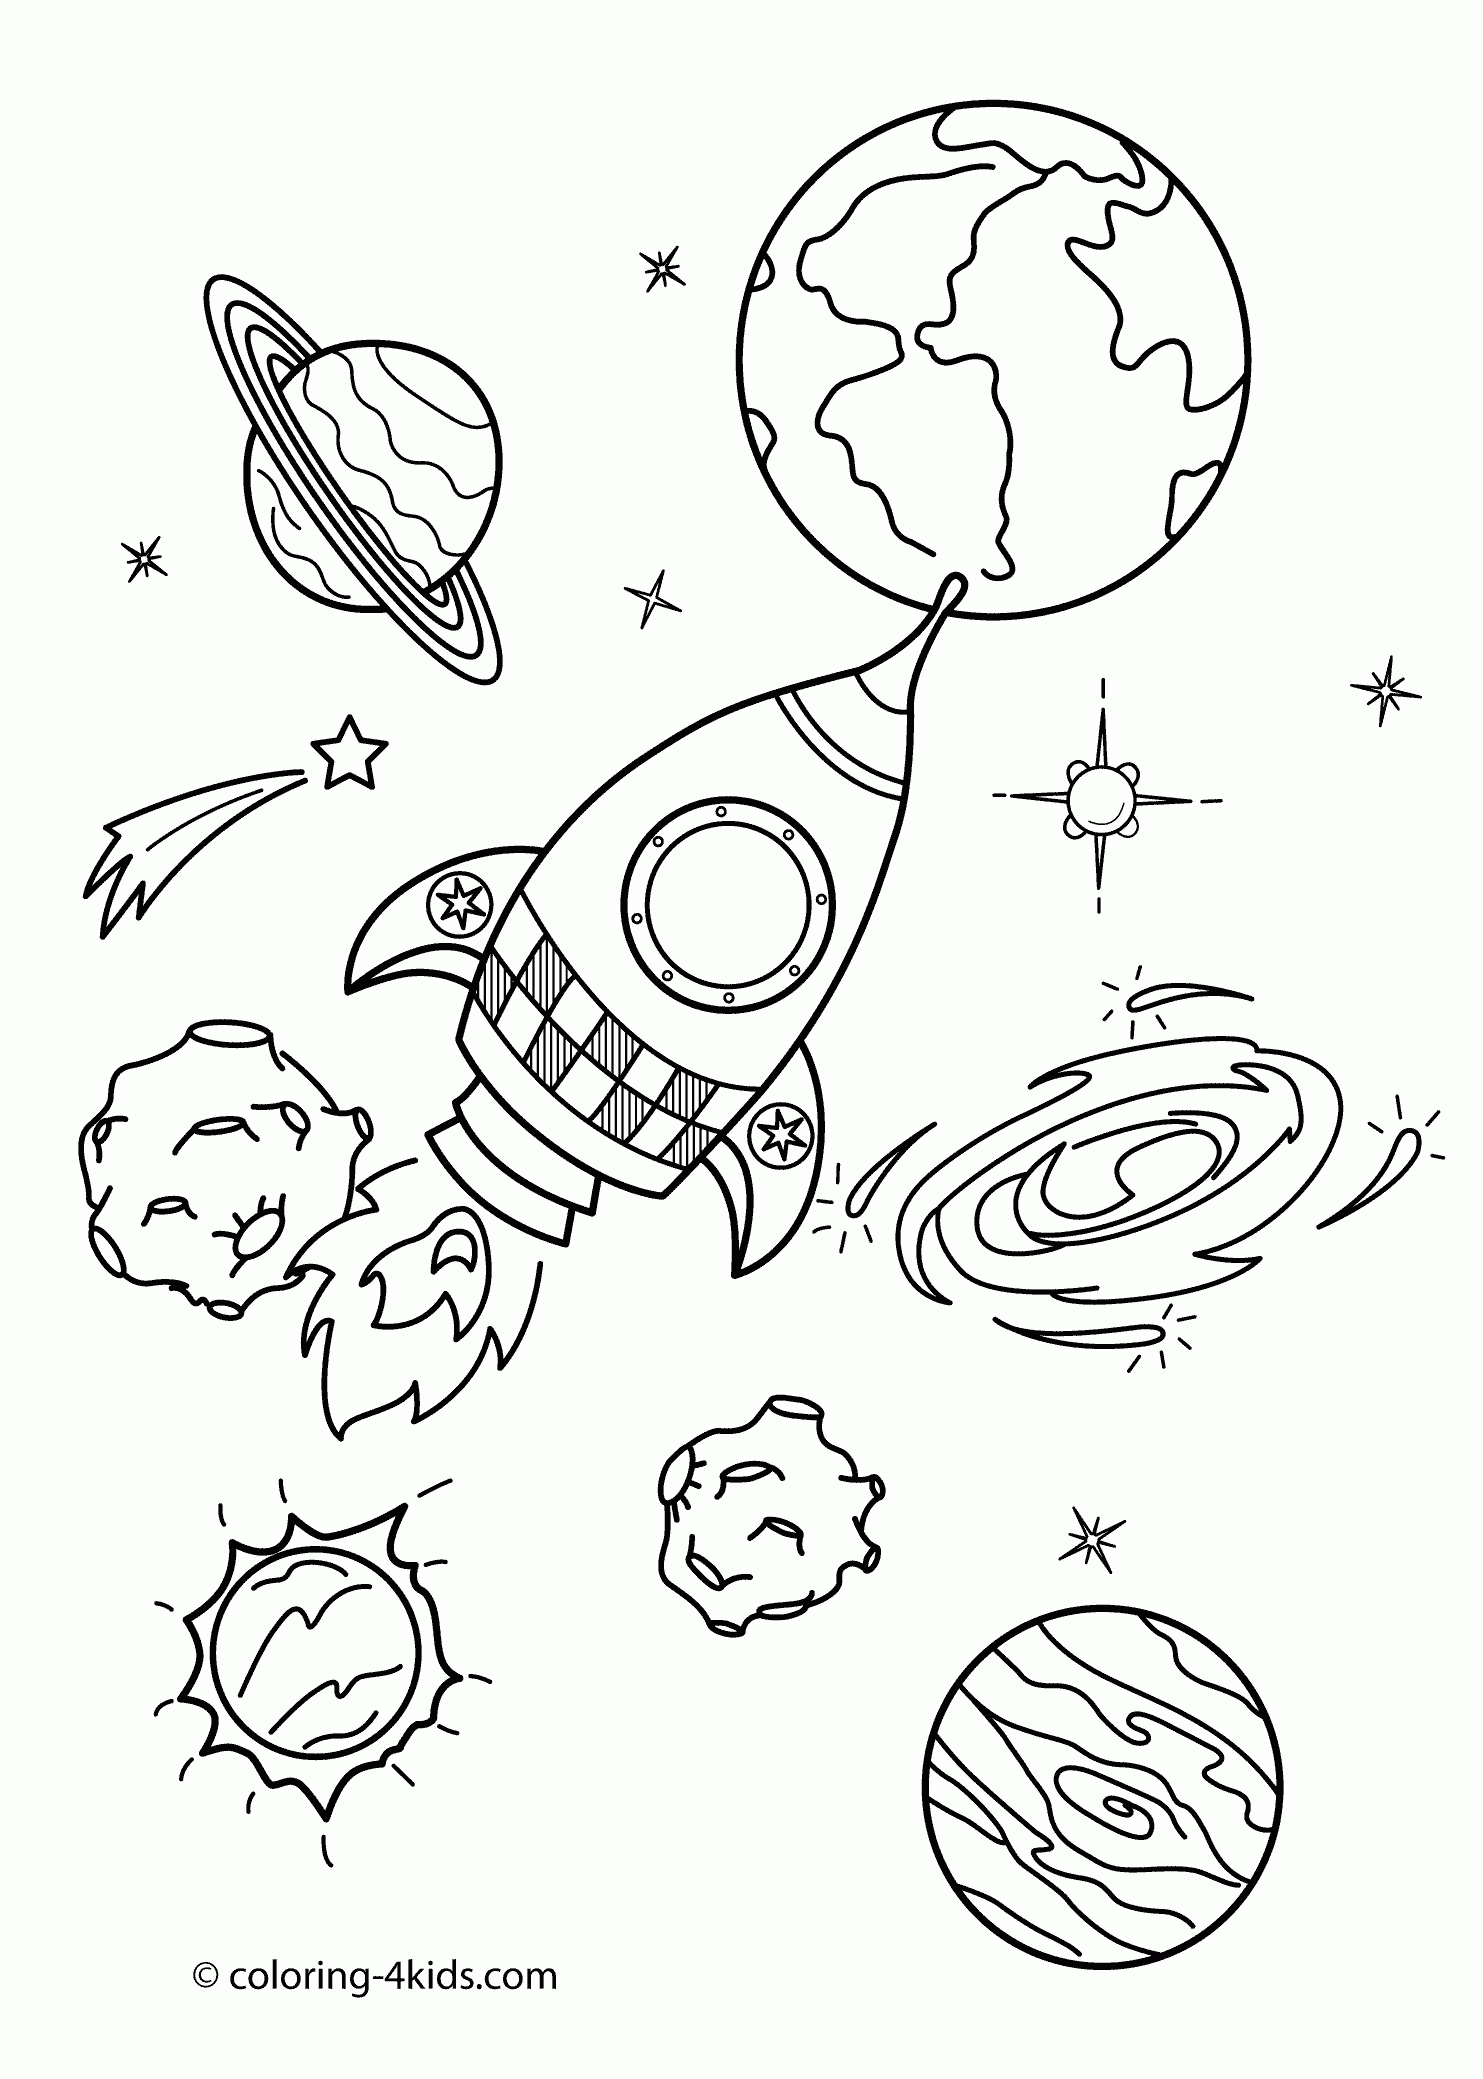 Space Coloring Pages Pdf Coloriage Astronaute À Imprimer pour Coloriage Astronaute 